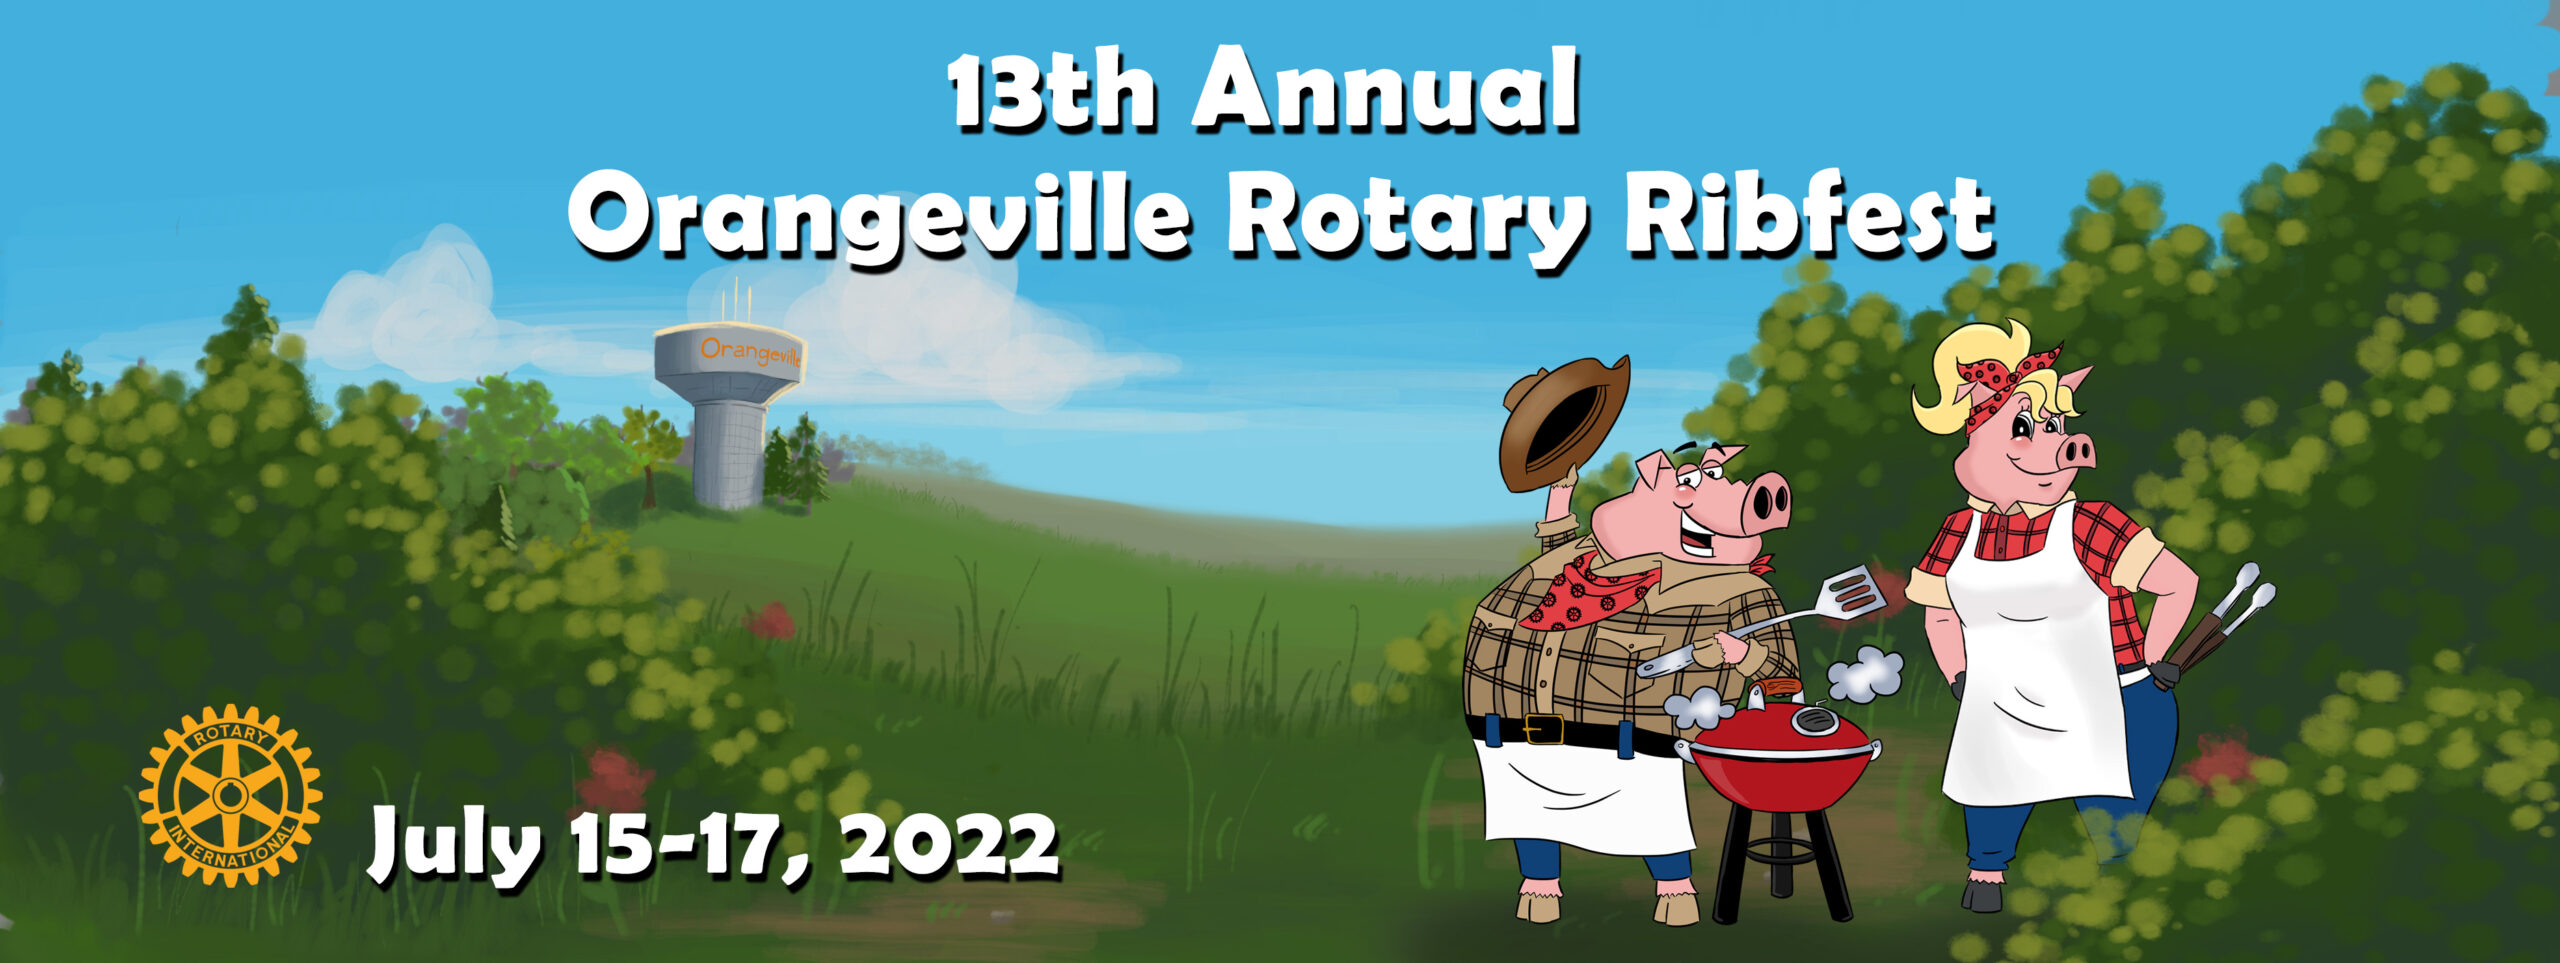 Mascots in field with text, 13th Annual Orangeville Rotary Ribfest